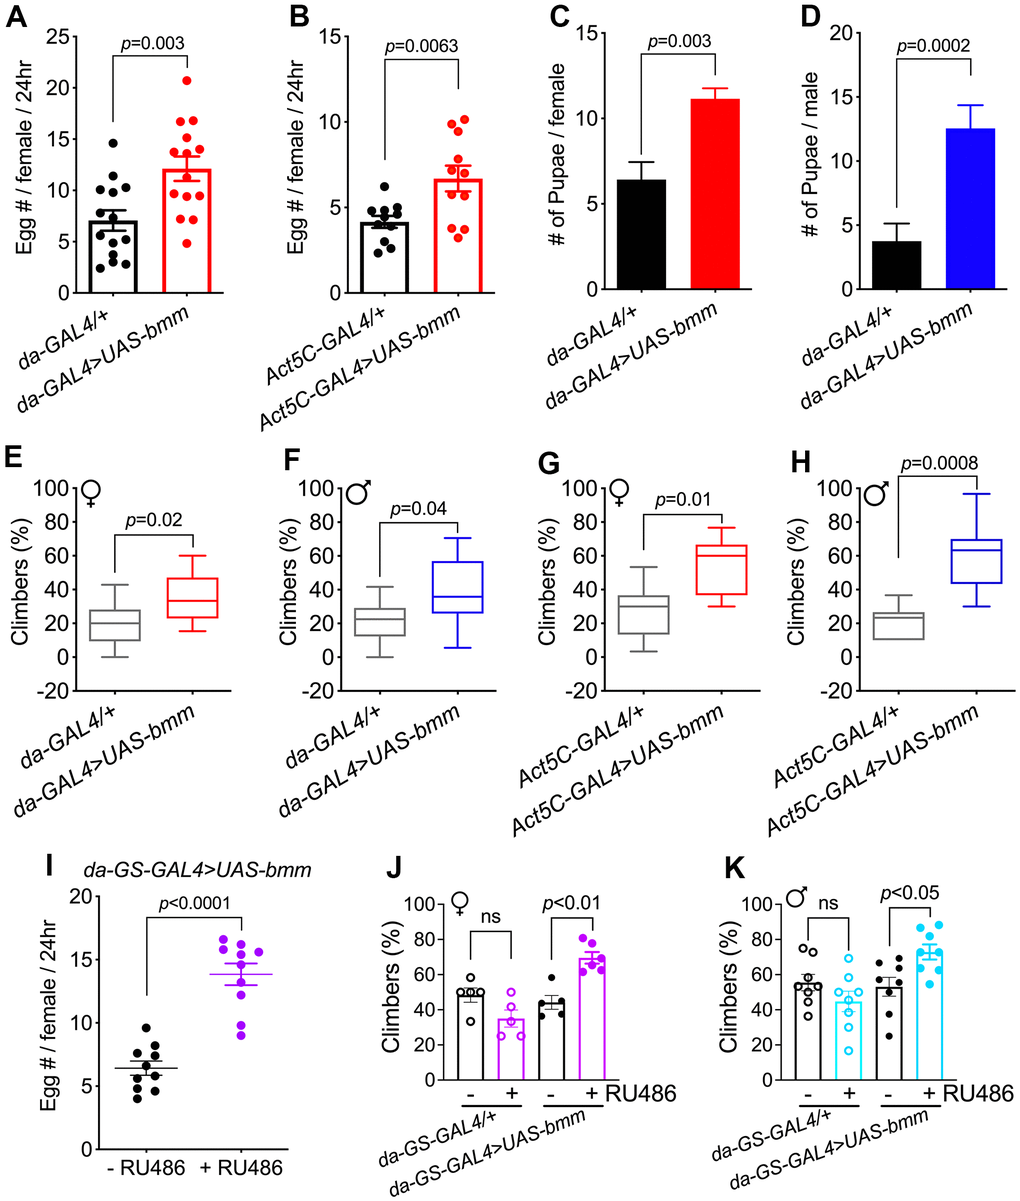 bmm overexpression promotes physiological fitness in both female and male Drosophila. (A) Fecundity of 2-week-old da-GAL4/+ vs. da-GAL4>UAS-bmm female flies. n=168 for da-GAL4/+ and n=154 for da-GAL4>UAS-bmm group. (B) Fecundity of 2-week-old Act5C-GAL4/+ vs. Act5C-GAL4>UAS-bmm female flies. n=93 for Act5C-GAL4/+ and n=84 for Act5C-GAL4>UAS-bmm group. (C) Number of pupae produced by da-GAL4/+ vs. da-GAL4>UAS-bmm female flies at 28 days of age paired with young male w1118 flies. n=25 for each genotype. (D) Number of pupae produced by w1118 virgin female flies after paired with da-GAL4/+ or da-GAL4>UAS-bmm male flies at 30 days of age. n=80 for each genotype. Data are shown as mean±SEM and analyzed by two-tailed Student t-test in (A–D). (E) Locomotion analysis of female da-GAL4/+ vs. da-GAL4>UAS-bmm flies at 38 days of age. n=84-151 for each group. (F) Locomotion analysis of male da-GAL4/+ vs. da-GAL4>UAS-bmm flies at 40 days of age. n=147-172 for each group. (G, H) Locomotion analysis of Act5C-GAL4/+ vs. Act5C-GAL4>UAS-bmm at 35 days of age. n=105 for each group. Data are shown as box and whisker plot and analyzed by two-tailed Student t-test in (E–H). (I) Fecundity of 2-week-old inducible da-GS-GAL4>UAS-bmm female flies with or without RU486 induction. n=50 for each group. Data are shown as mean±SEM and analyzed by two-tailed Student t-test. (J) Locomotion analysis of female flies using inducible da-GS-GAL4 driver at 76 days of age with or without RU486 induction. n=60-73 for each group. (K) Locomotion analysis of male flies using inducible da-GS-GAL4 driver at 72 days of age with or without RU486 induction. n=95-109 for each group. Data are shown as mean±SEM and analyzed by one-way ANOVA in (J, K). See also Supplementary Figure 2.